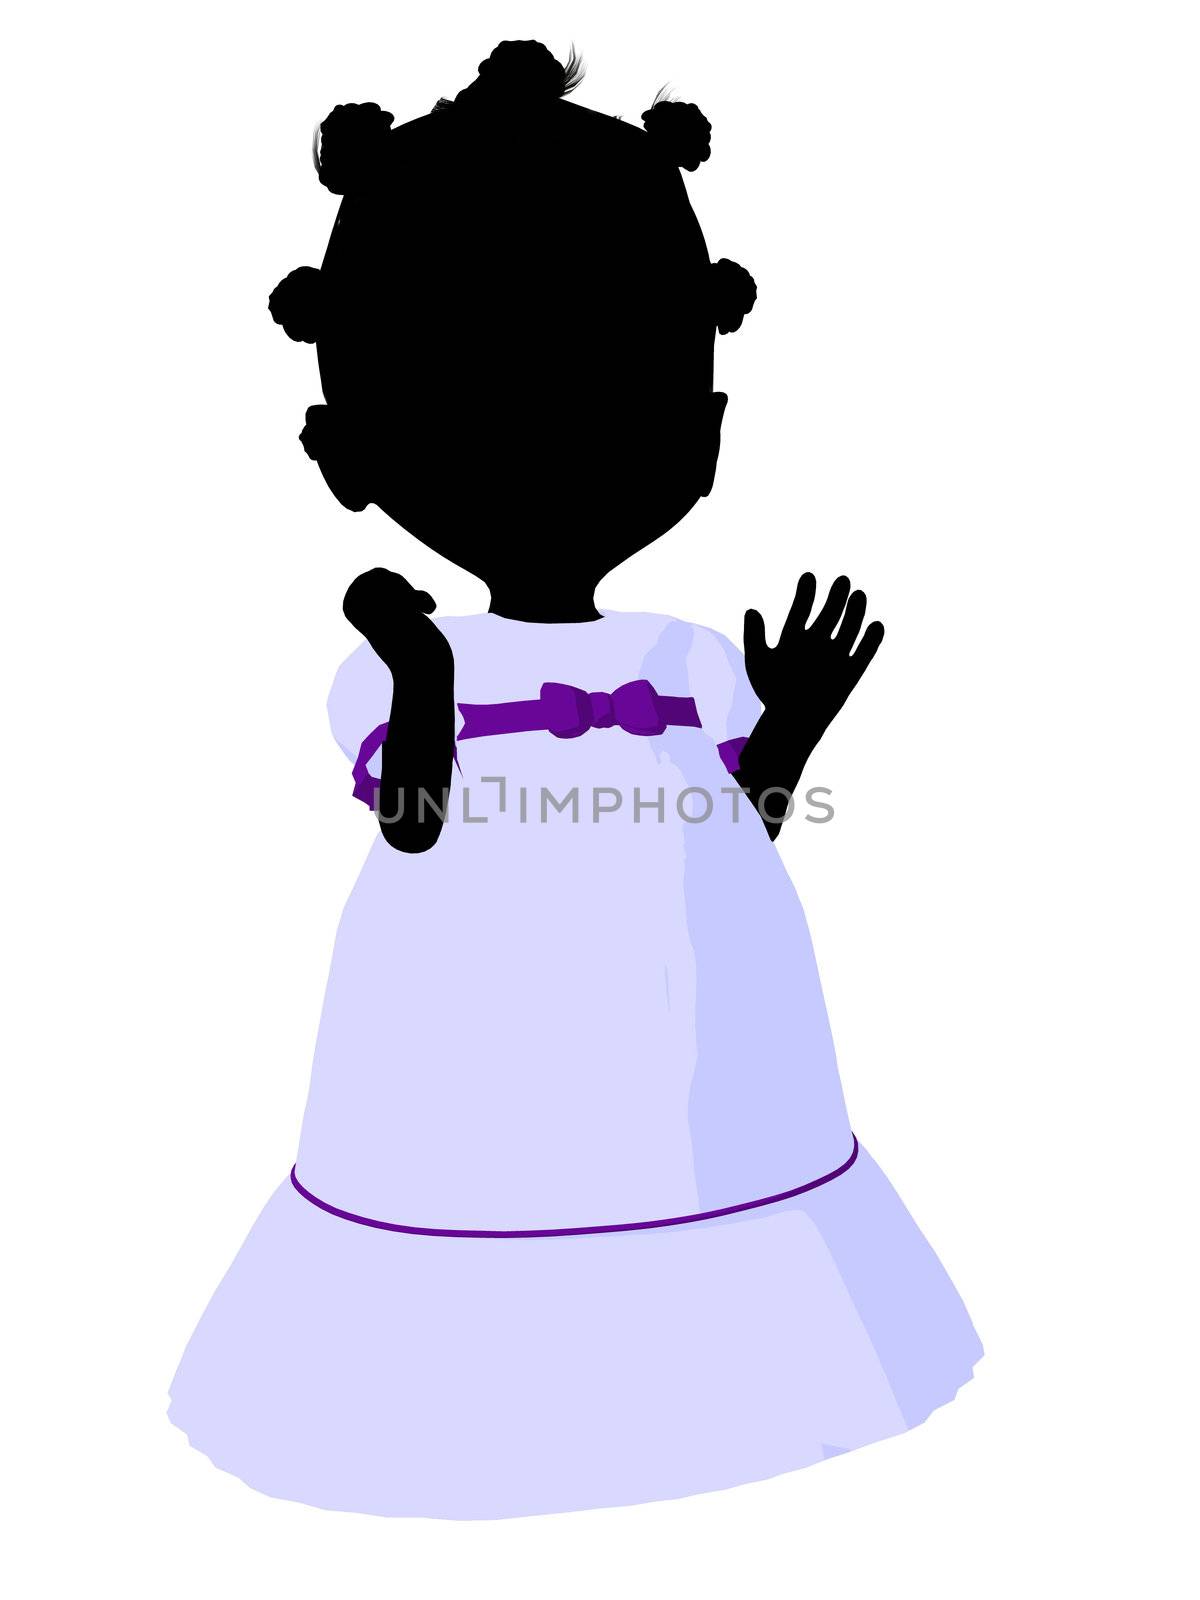 Little African American Romance Girl Illustration Silhouette by kathygold